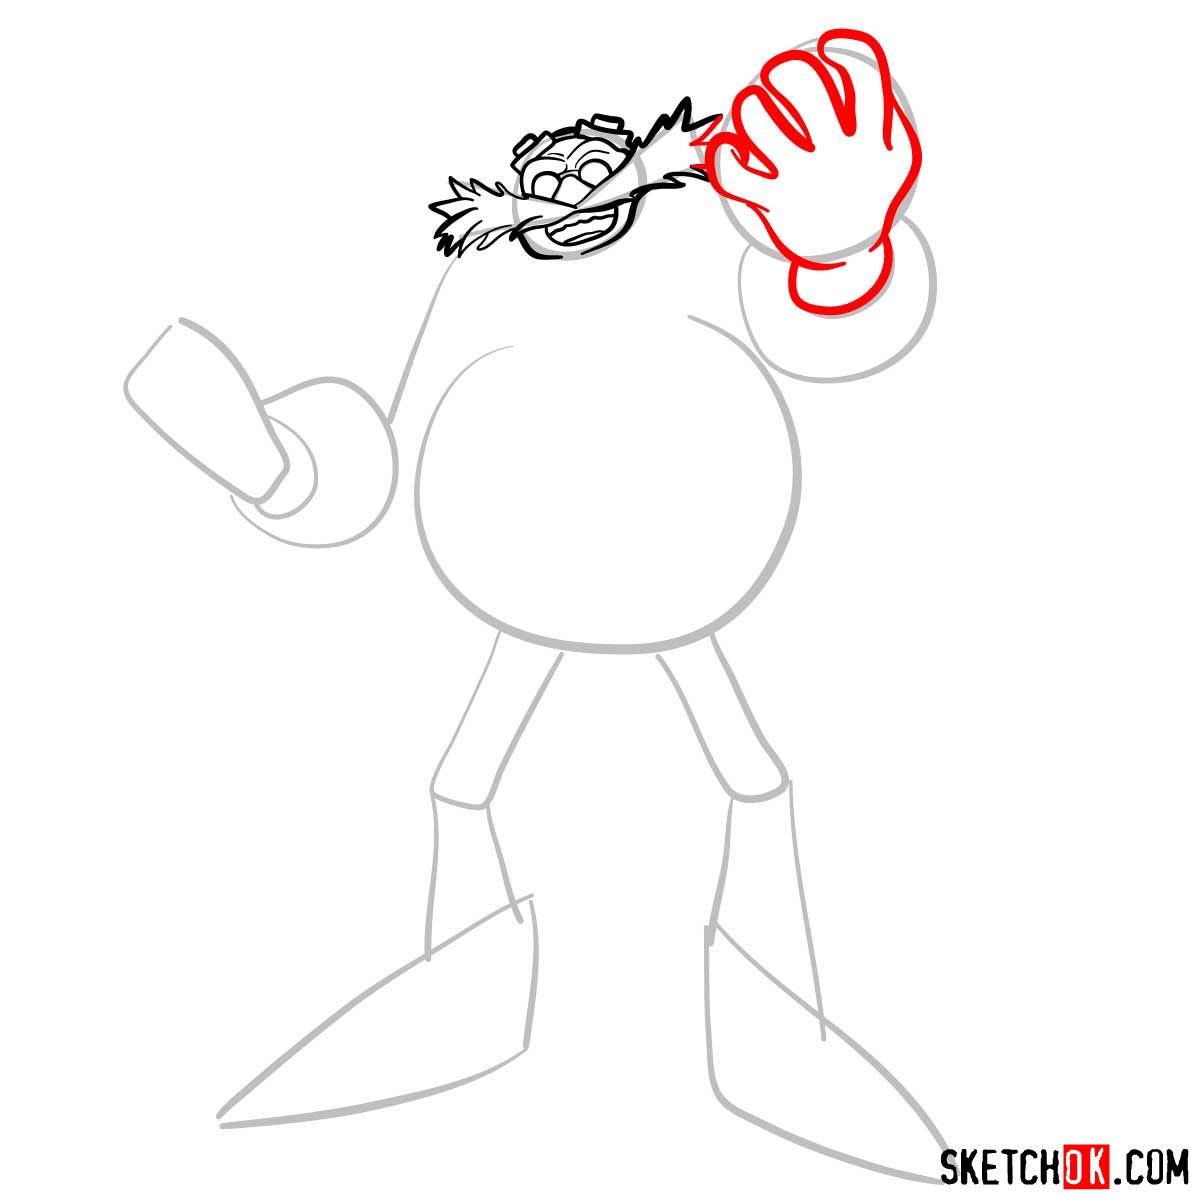 How to draw Dr. Robotnik (Eggman) from Sonic the Hedgehog - step 06